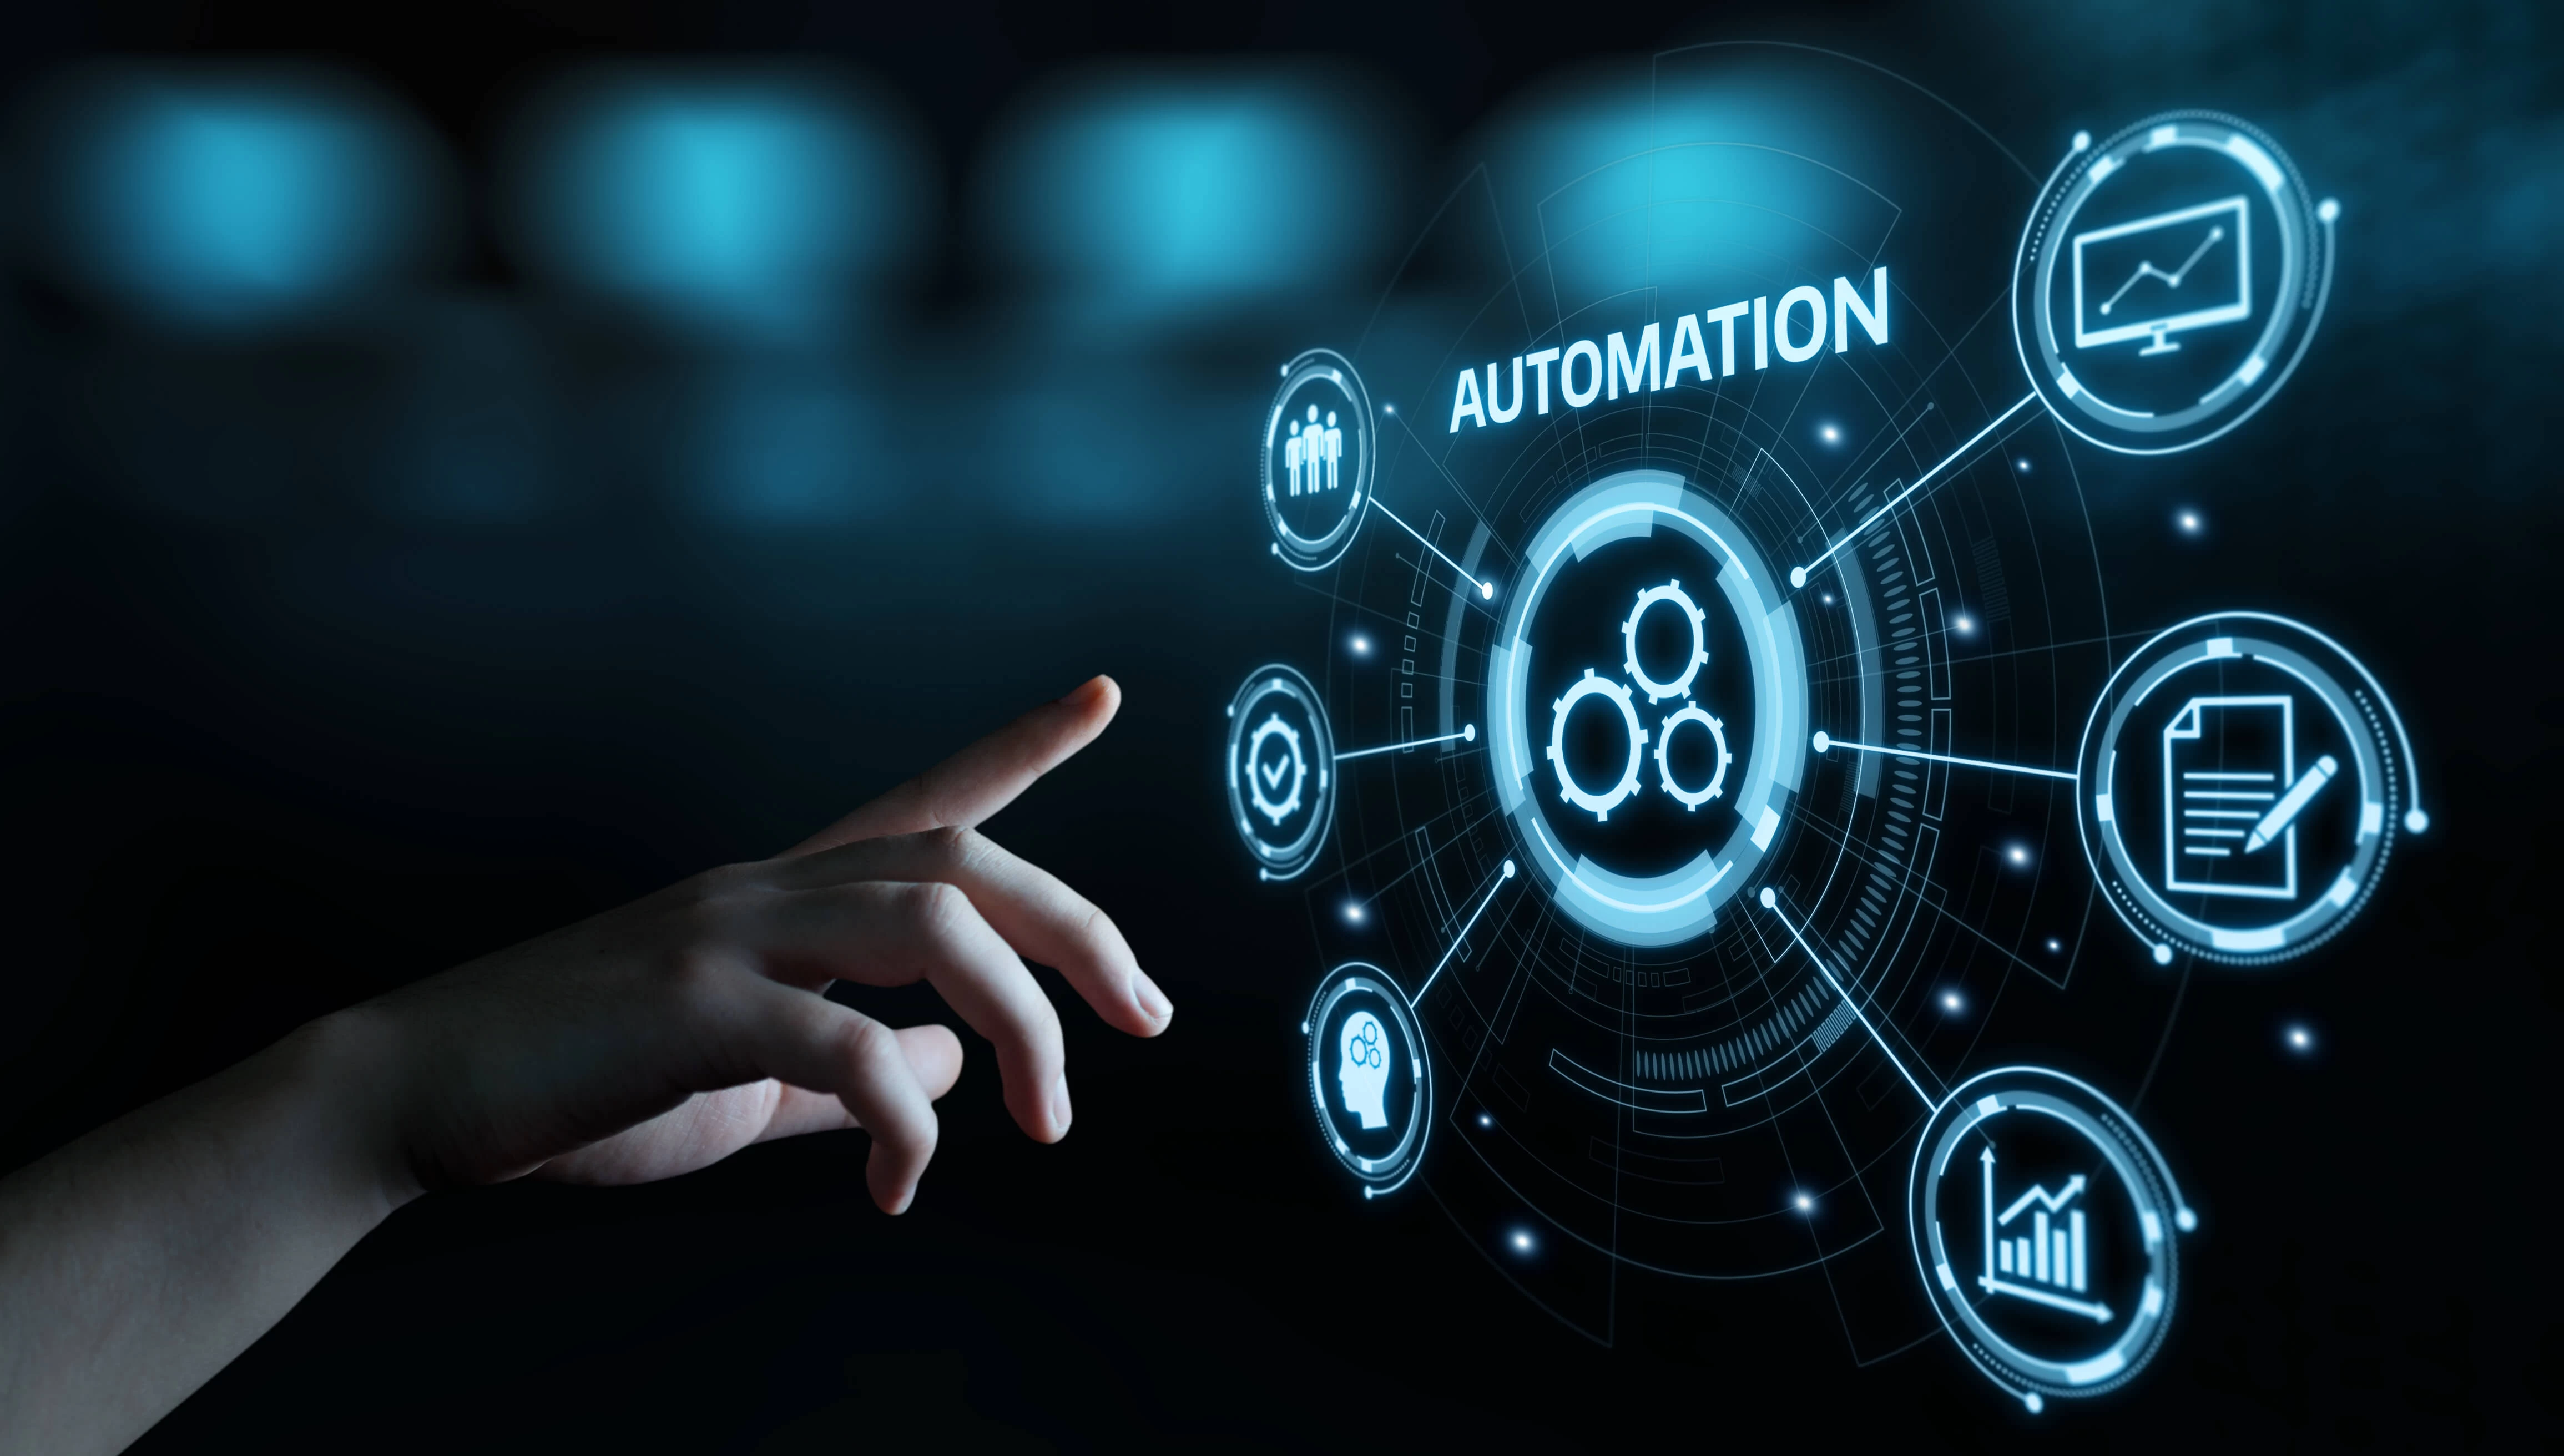 Using marketing automation to your advantage